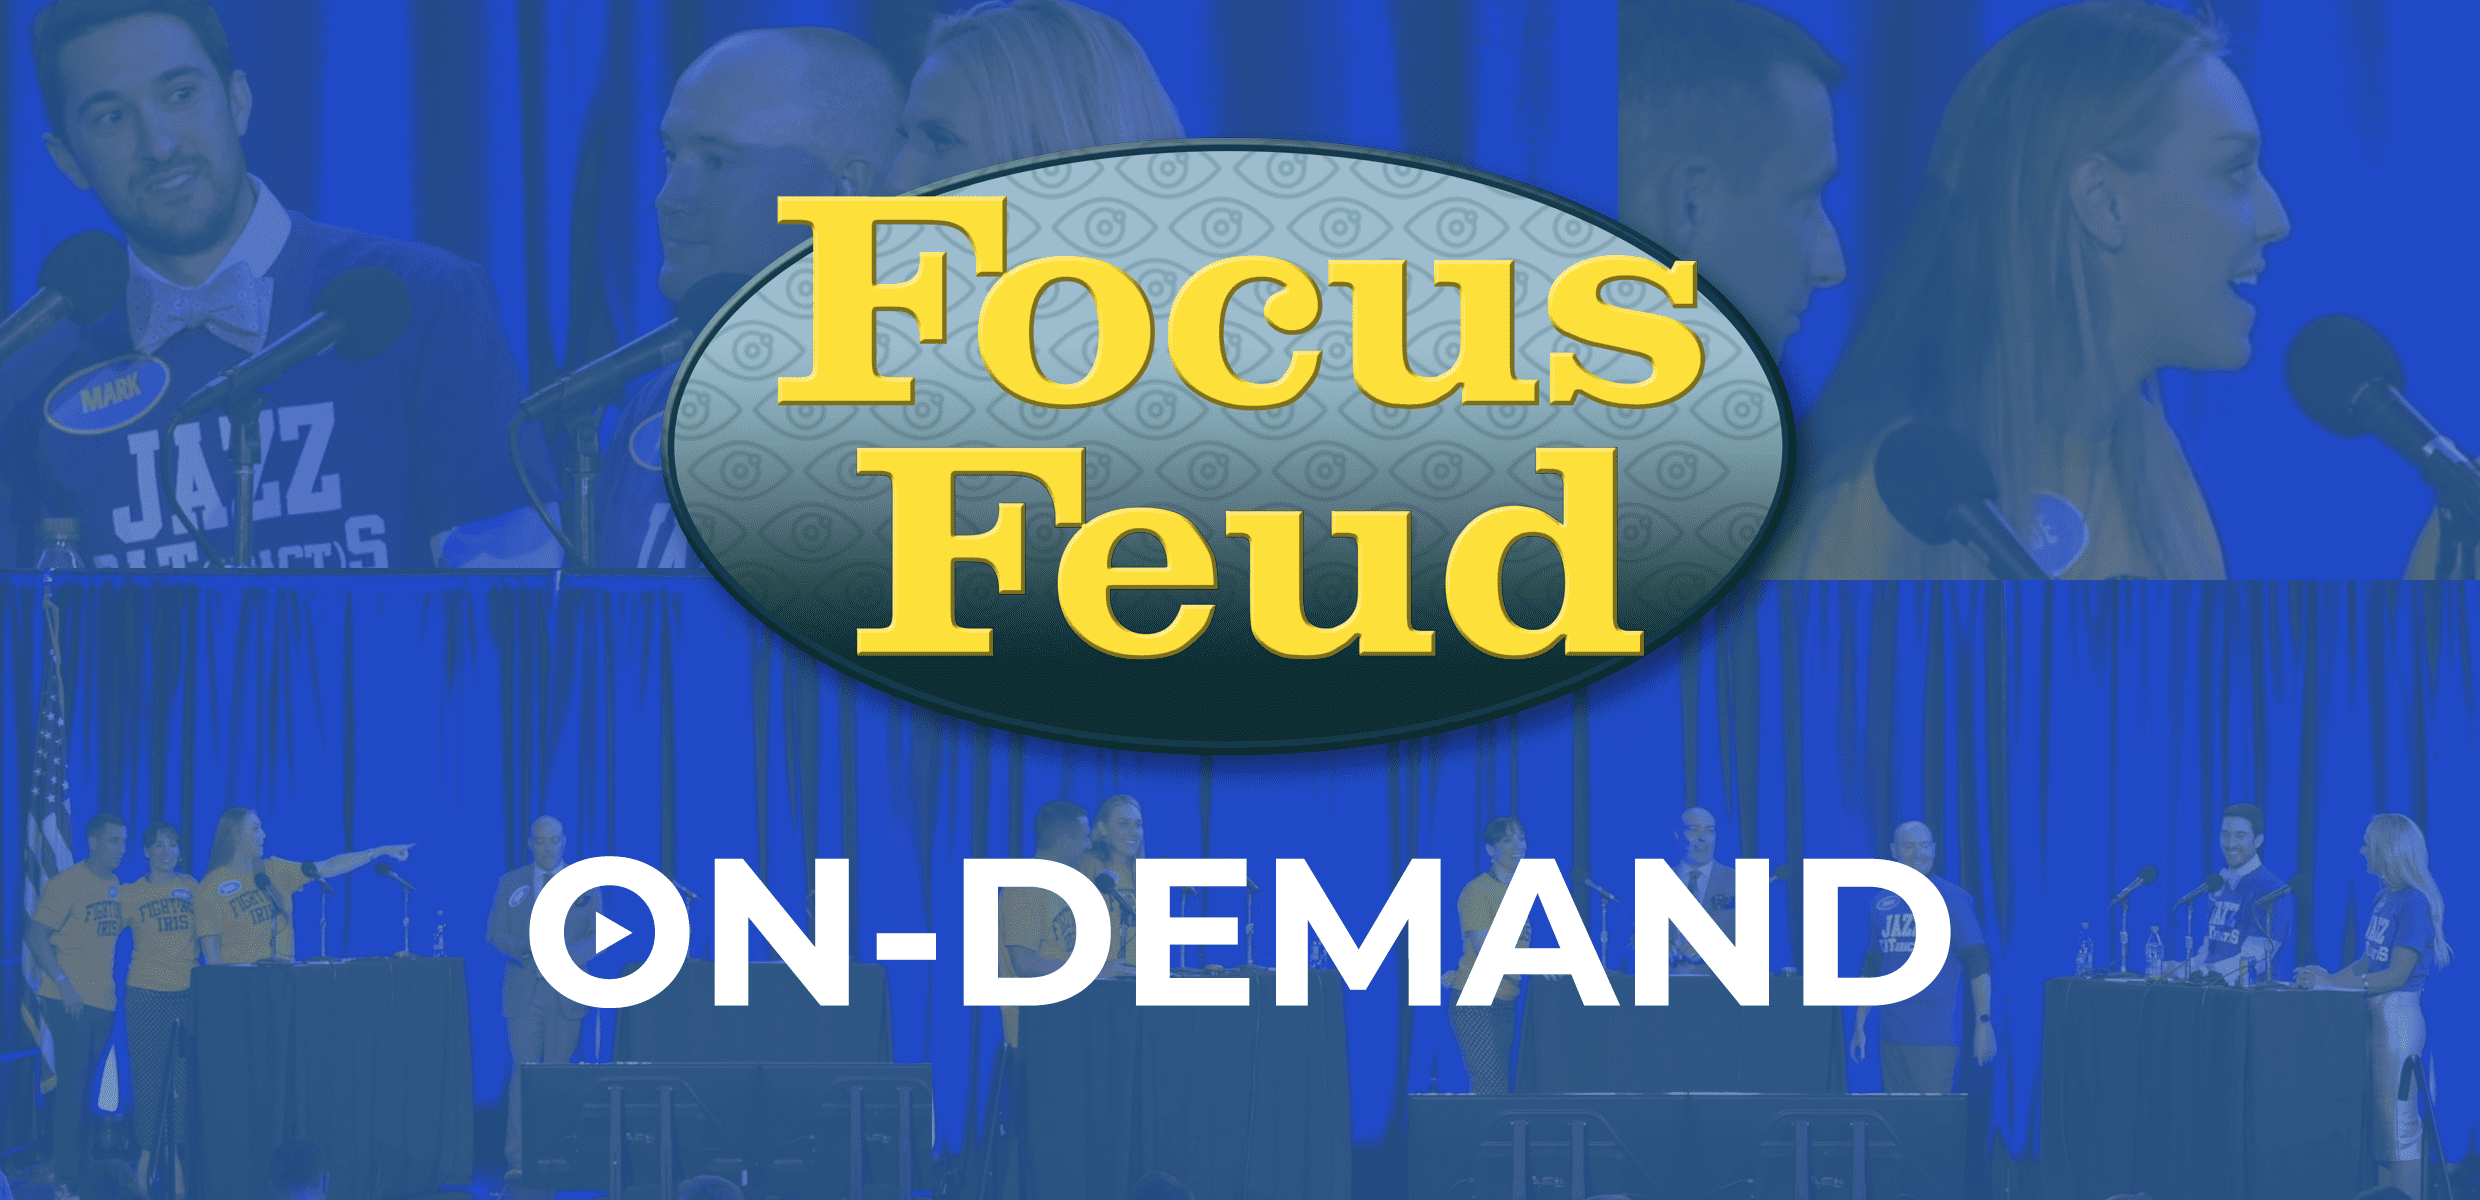 The Ultimate Optometric Showdown: Focus Feud is Now Available On-demand!